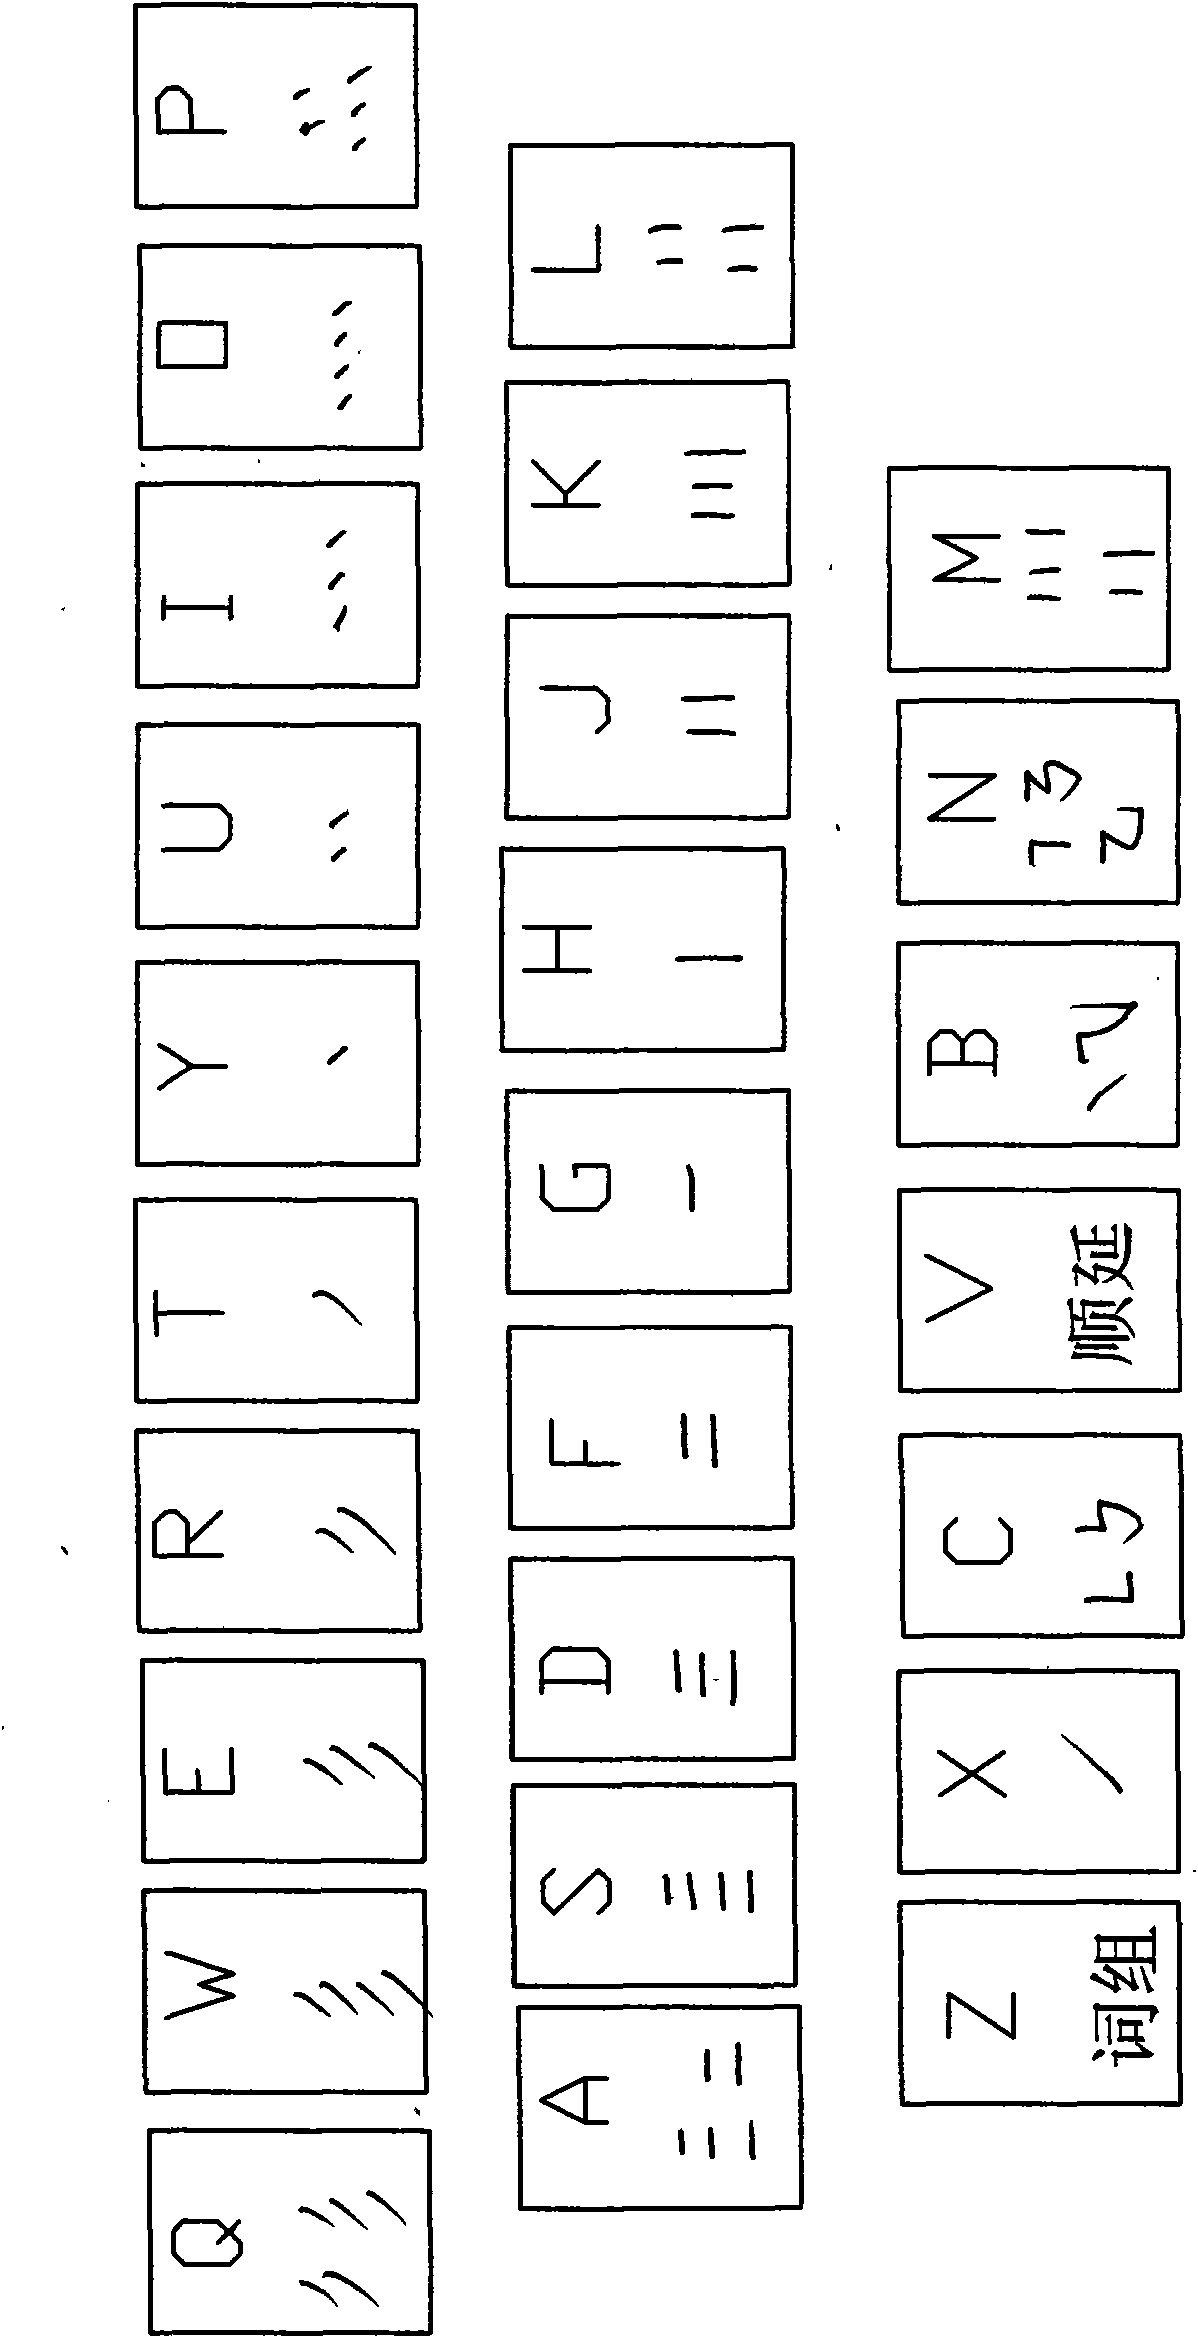 Chinese character input method for combining, arranging and encoding Chinese character strokes